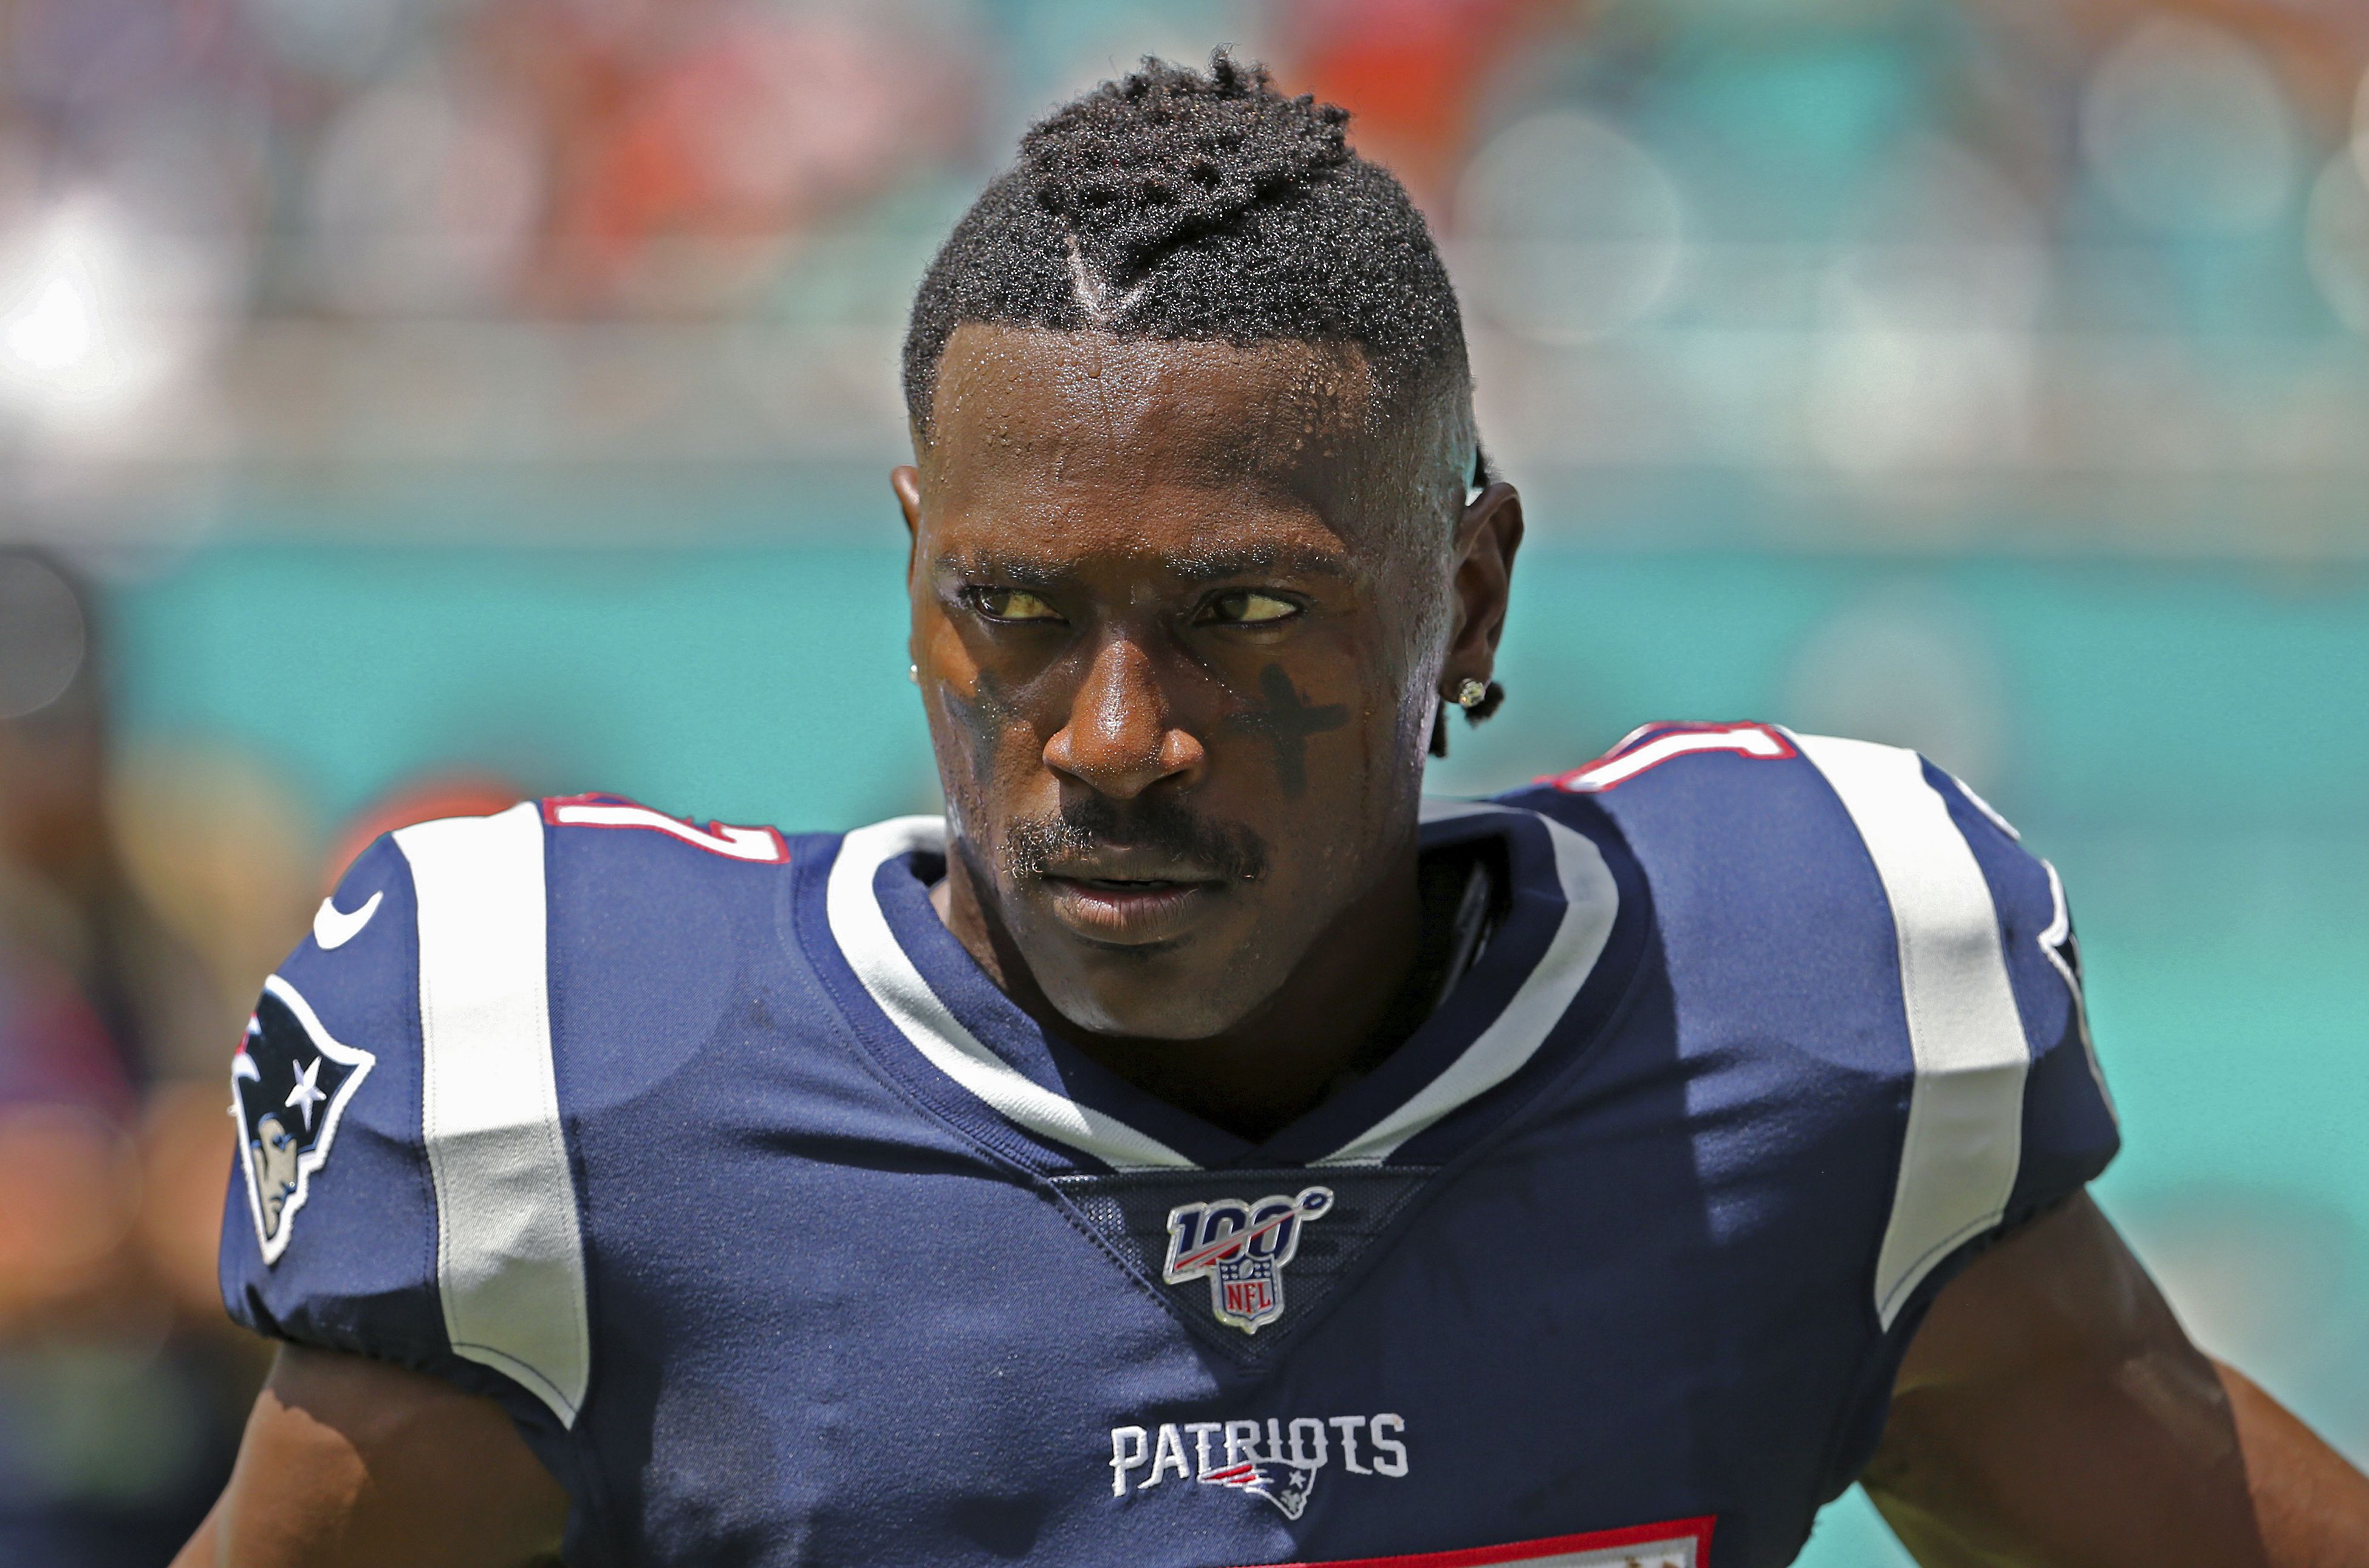 Antonio Brown says he will not be playing in the NFL anymore - The